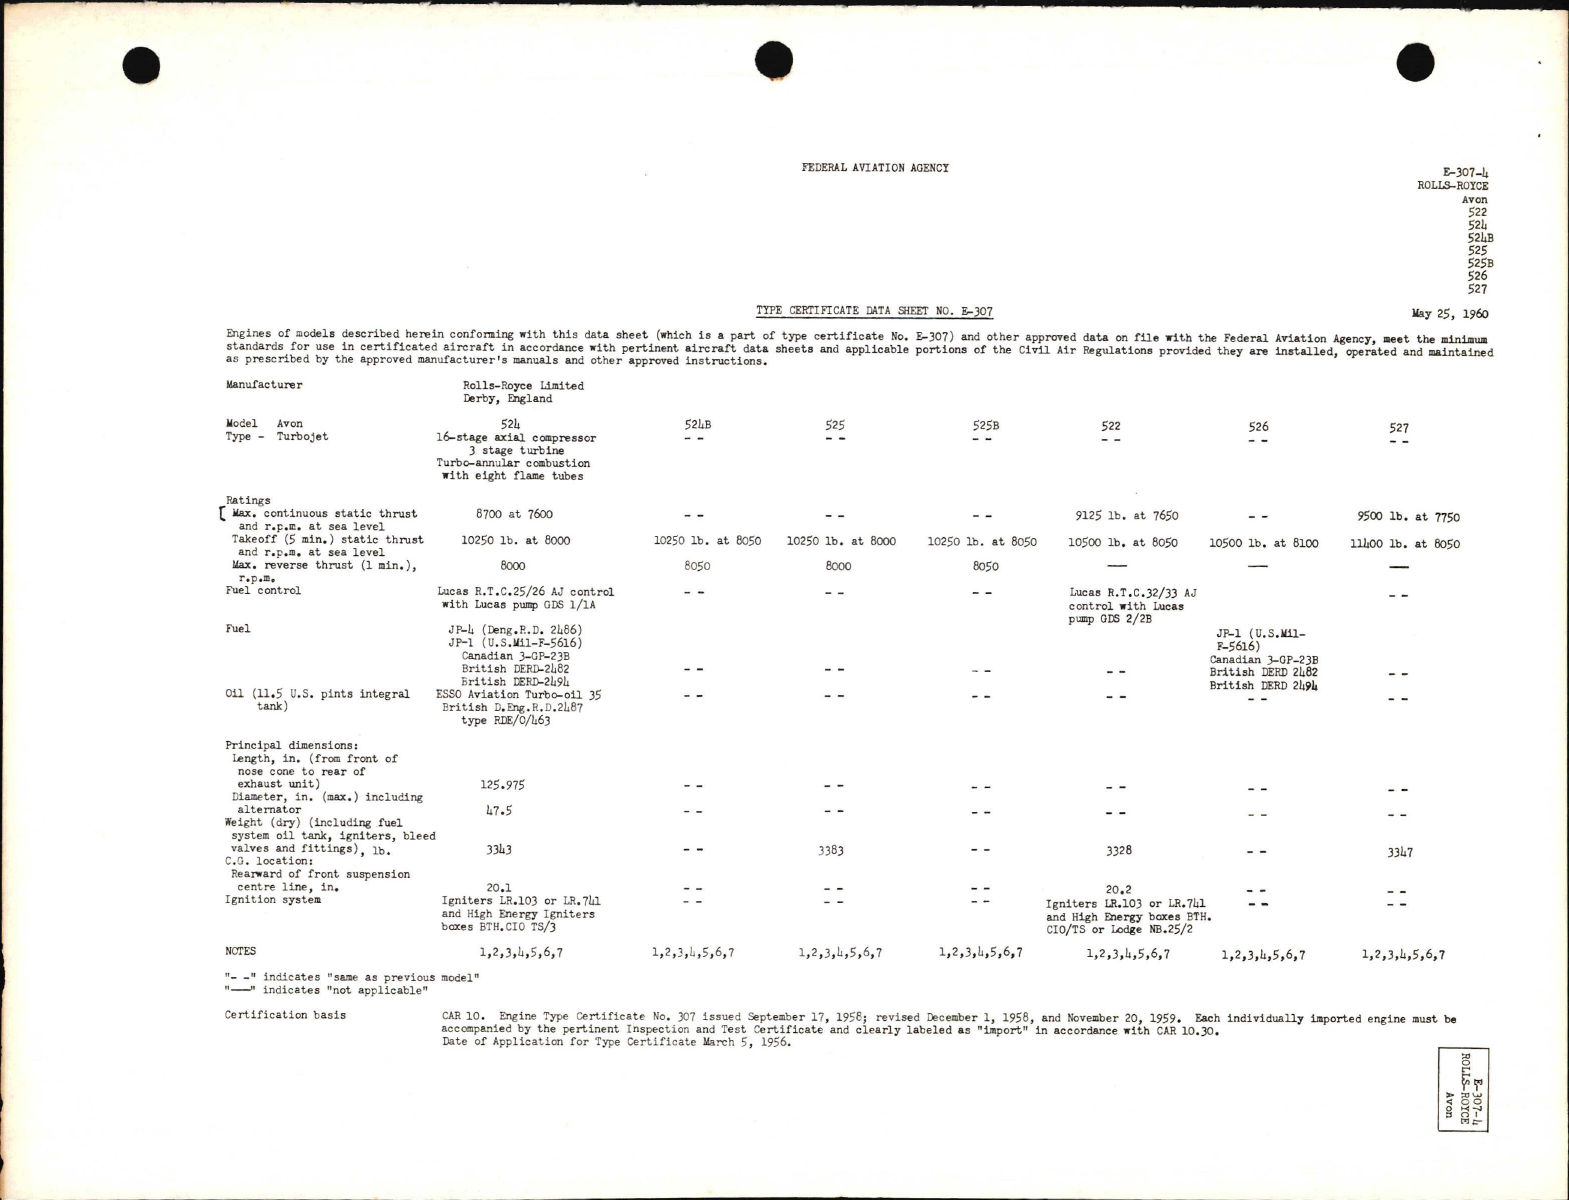 Sample page 1 from AirCorps Library document: Avon 522, 524, 524B, 525, 525B, 526, and 527